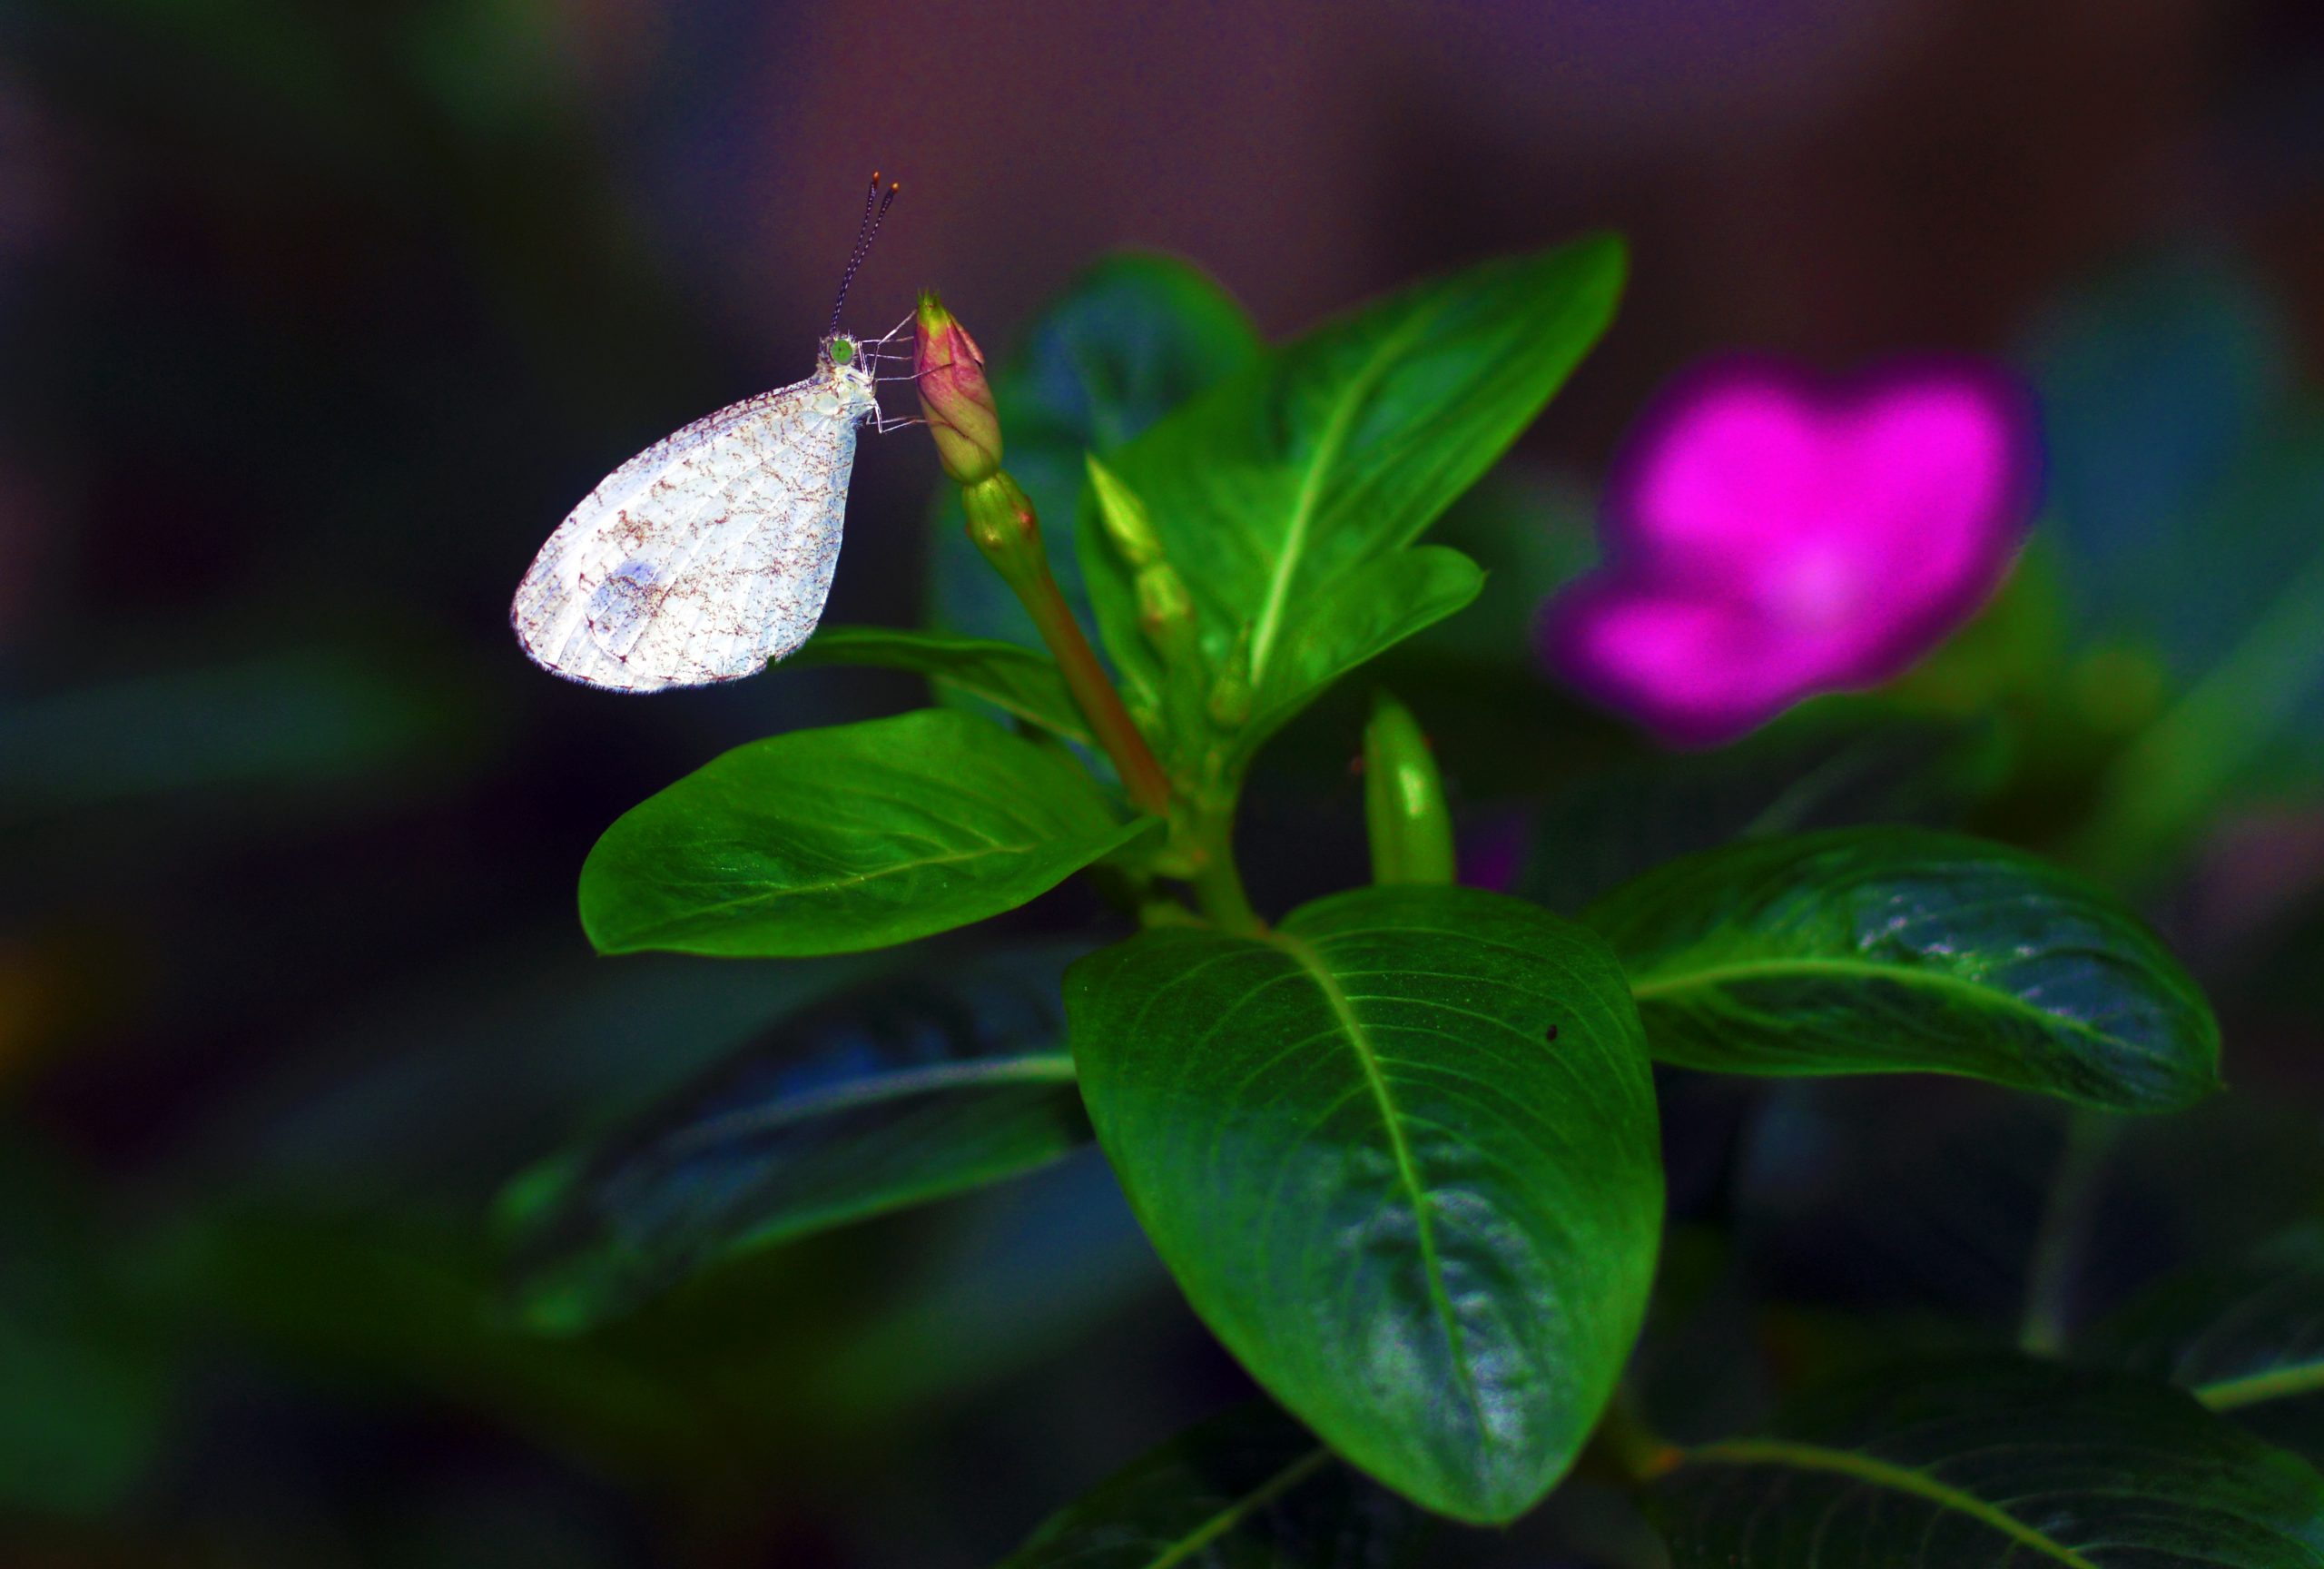 Butterfly on a bud